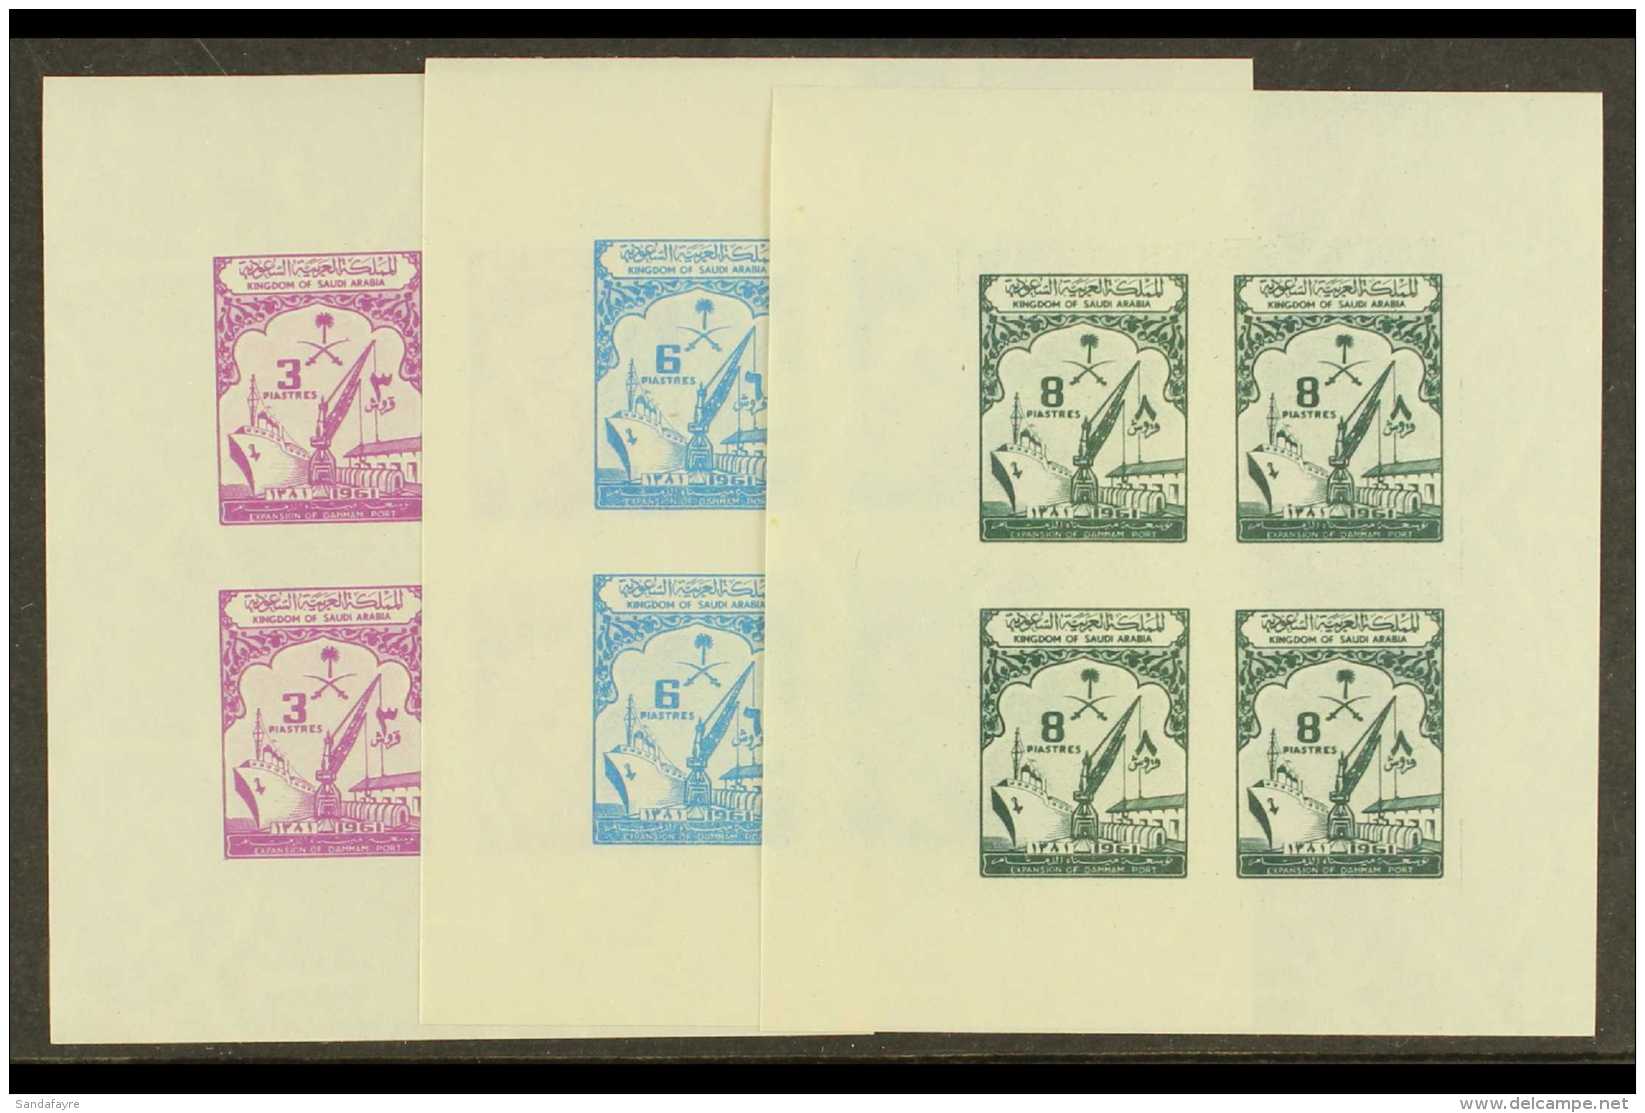 1961 PRESENTATION IMPERF MINIATURE SHEETS Dammam Port Extension Complete Set As Imperforate Miniature Sheets, As... - Saudi Arabia